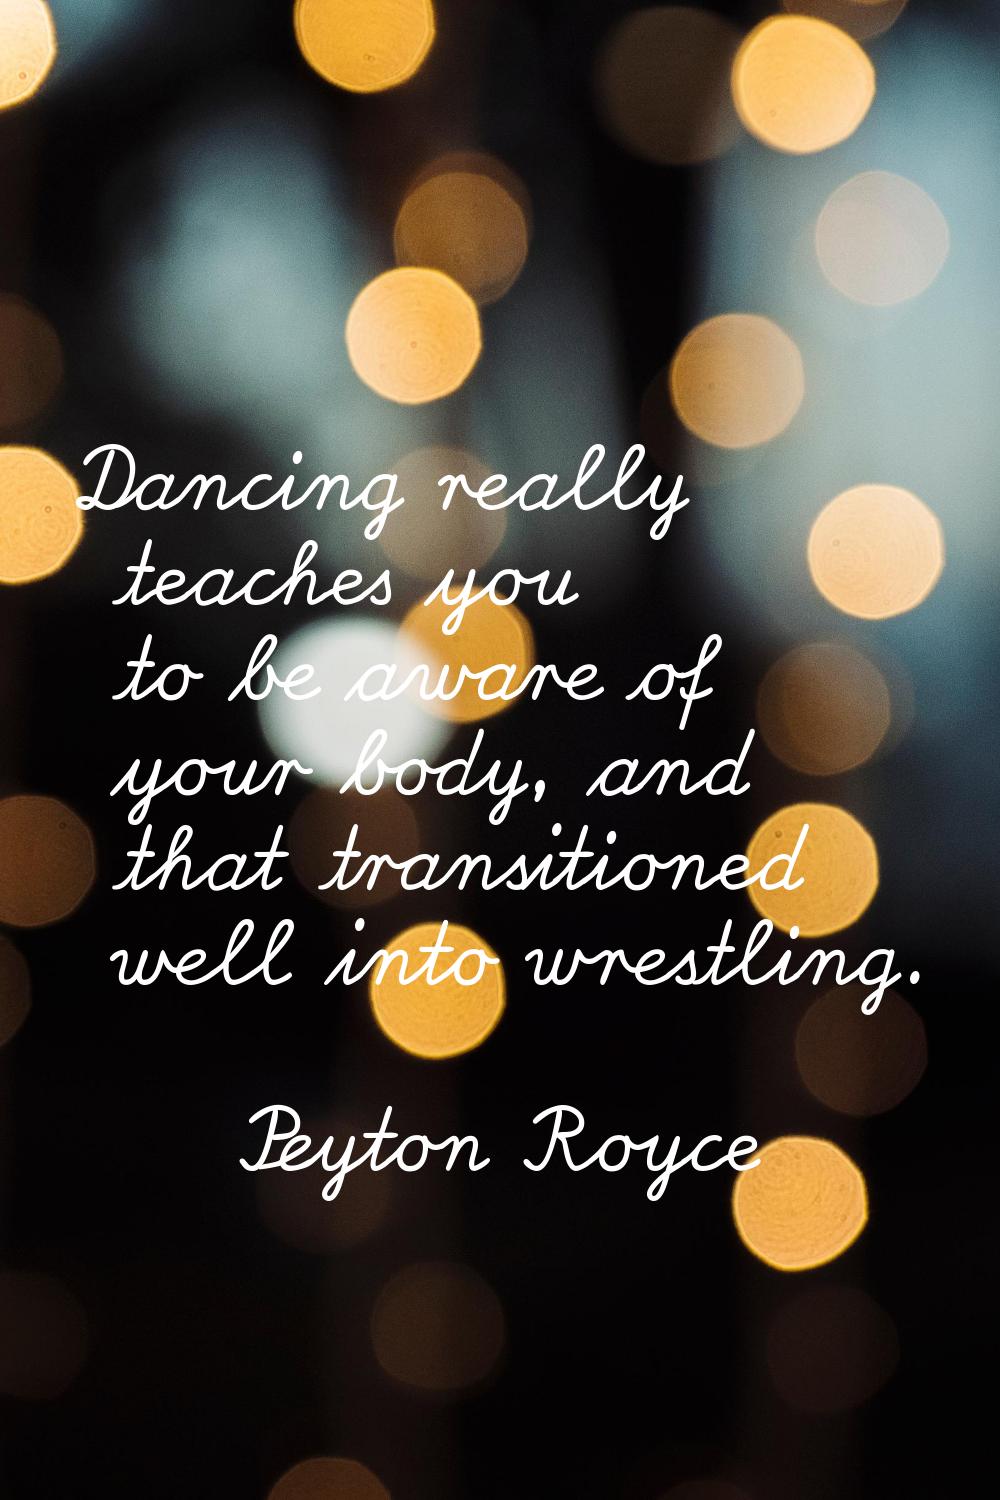 Dancing really teaches you to be aware of your body, and that transitioned well into wrestling.